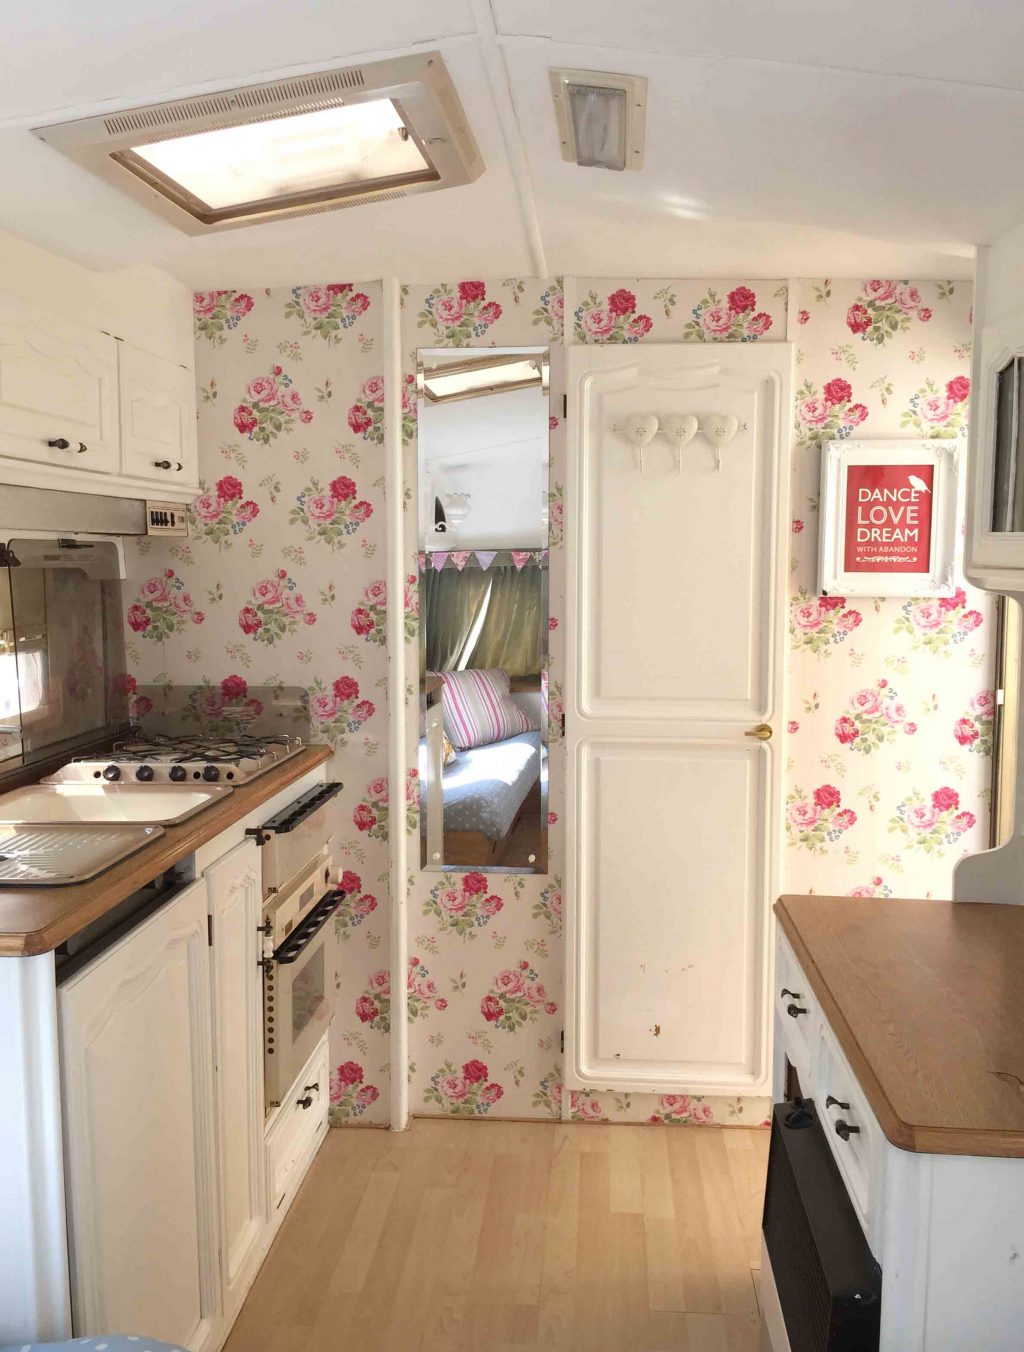 Tips for decorating a caravan by The Twinkle Diaries